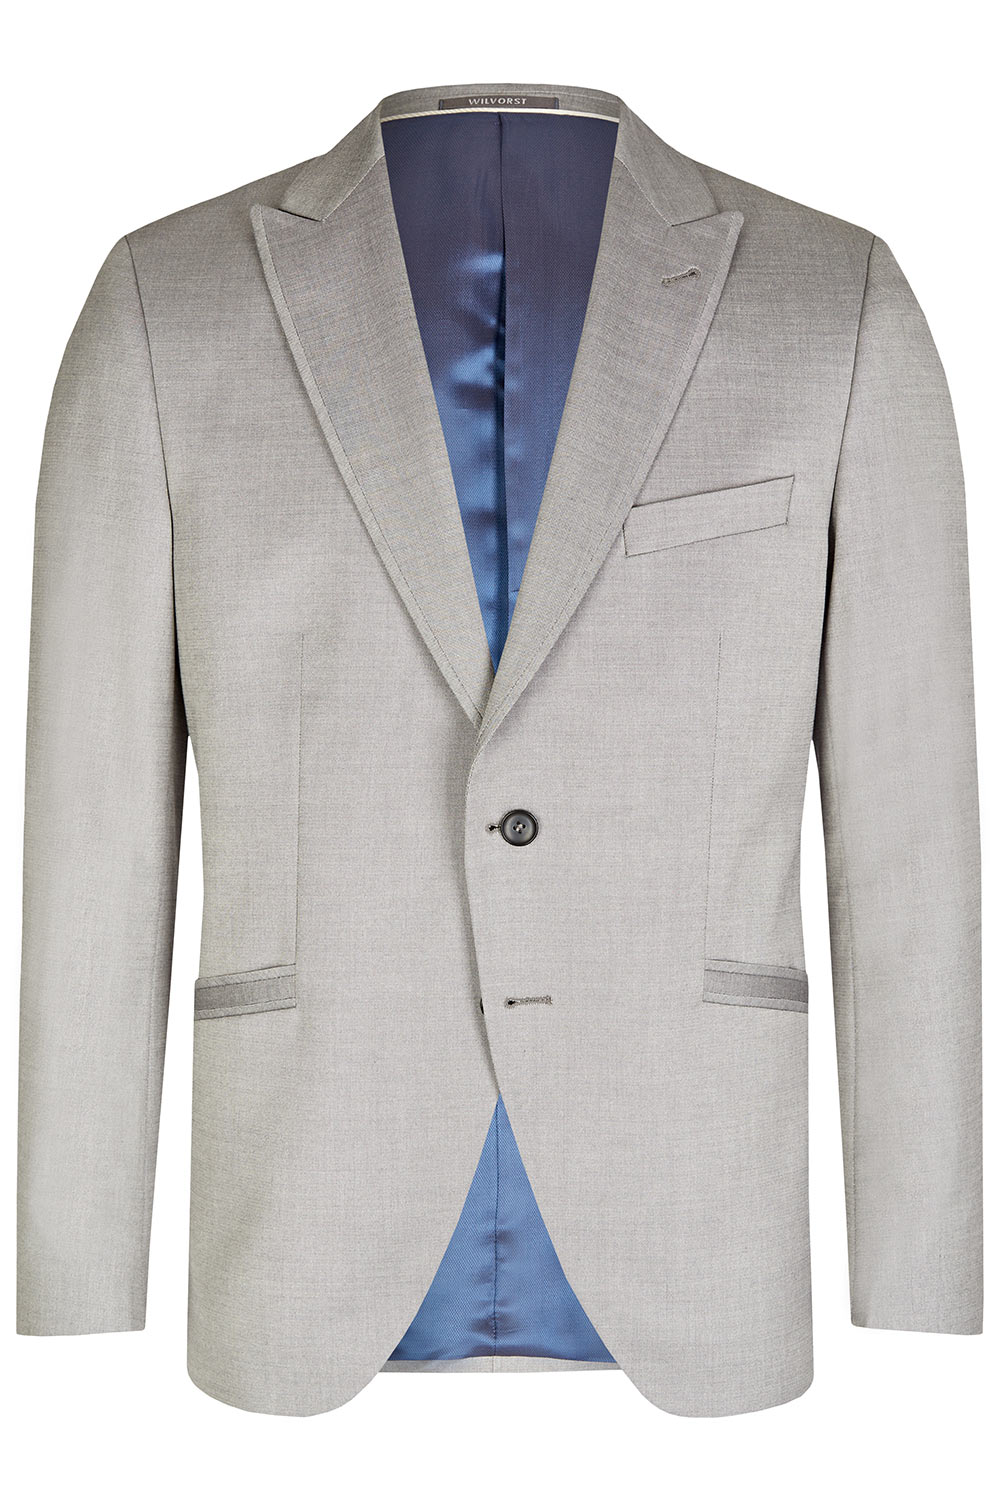 Silver Grey 3 piece Wedding Suit - Tom Murphy's Formal and Menswear